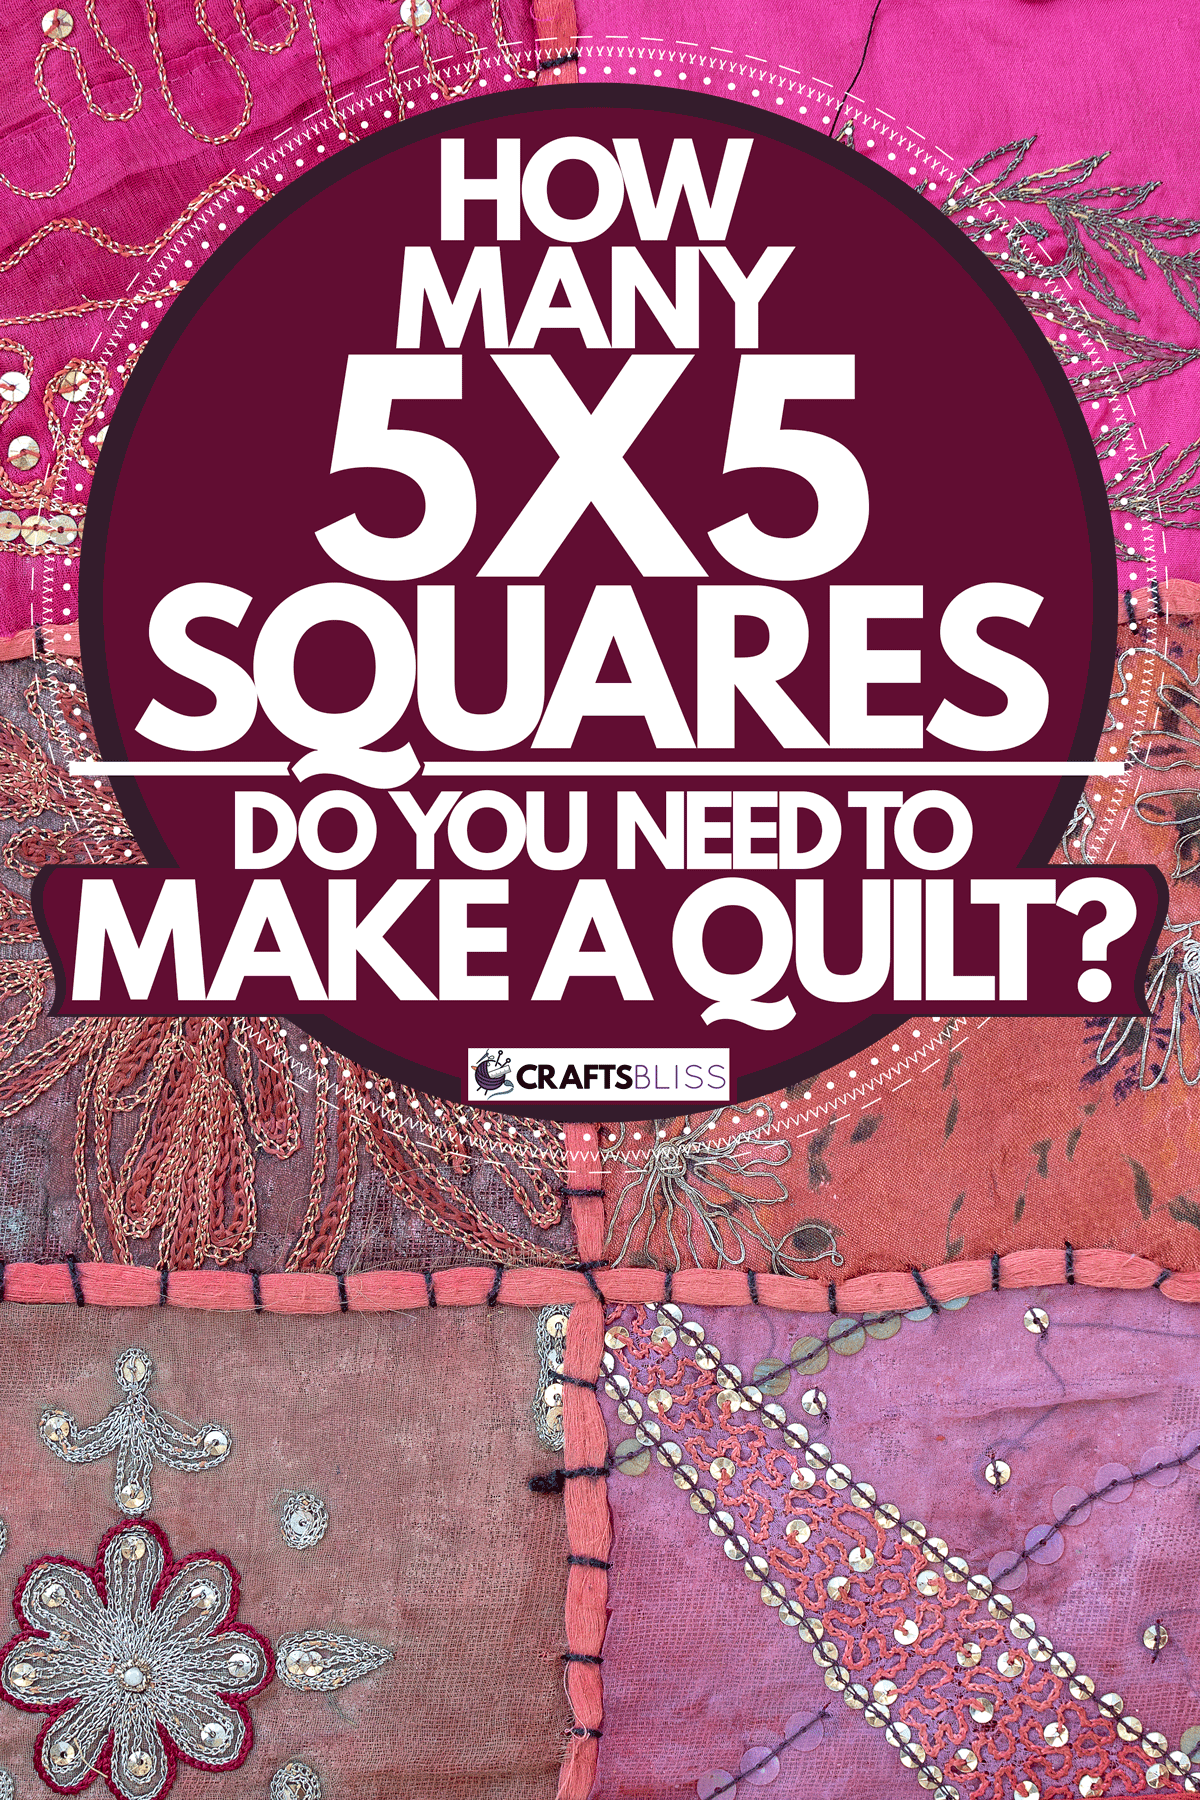 How Many 5X5 Squares To Make A Quilt?